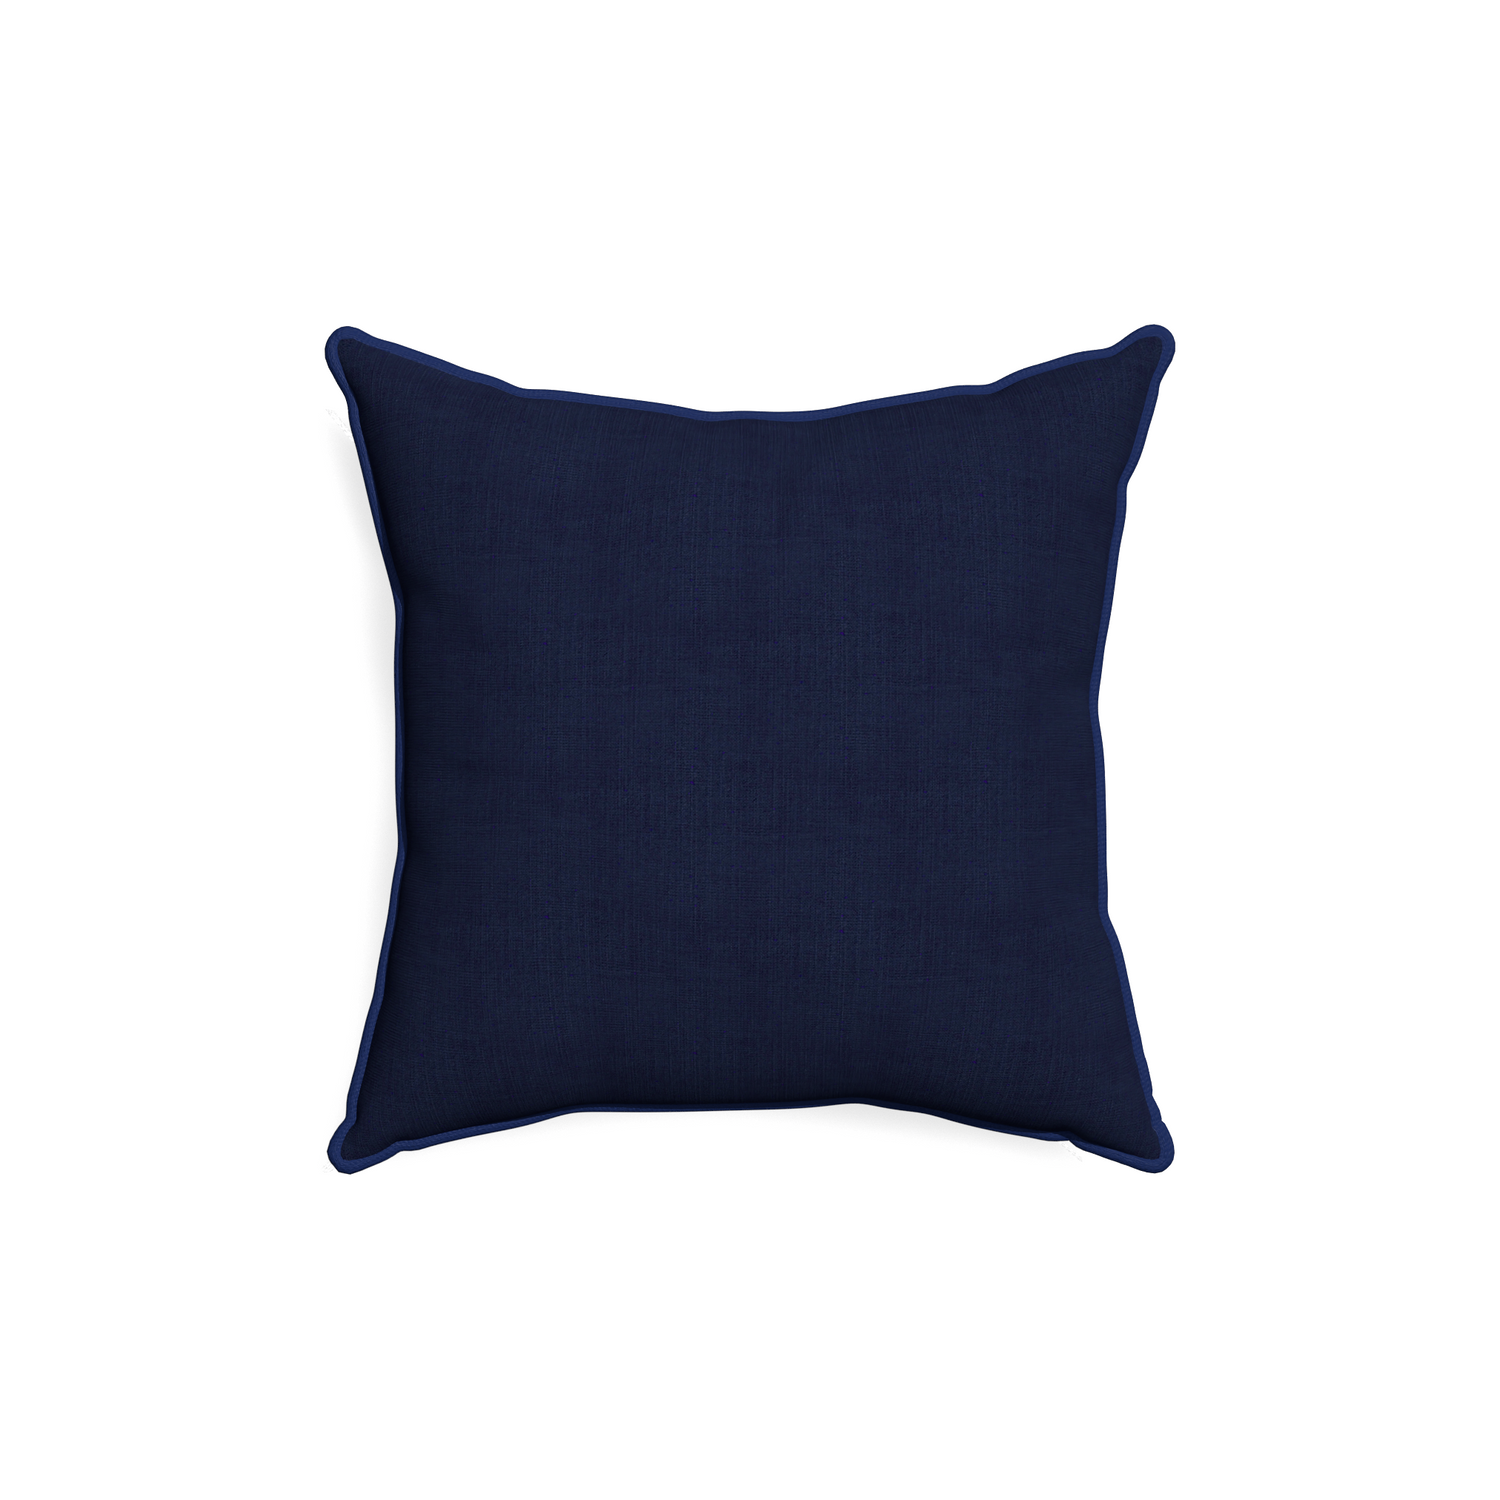 18-square midnight custom pillow with midnight piping on white background